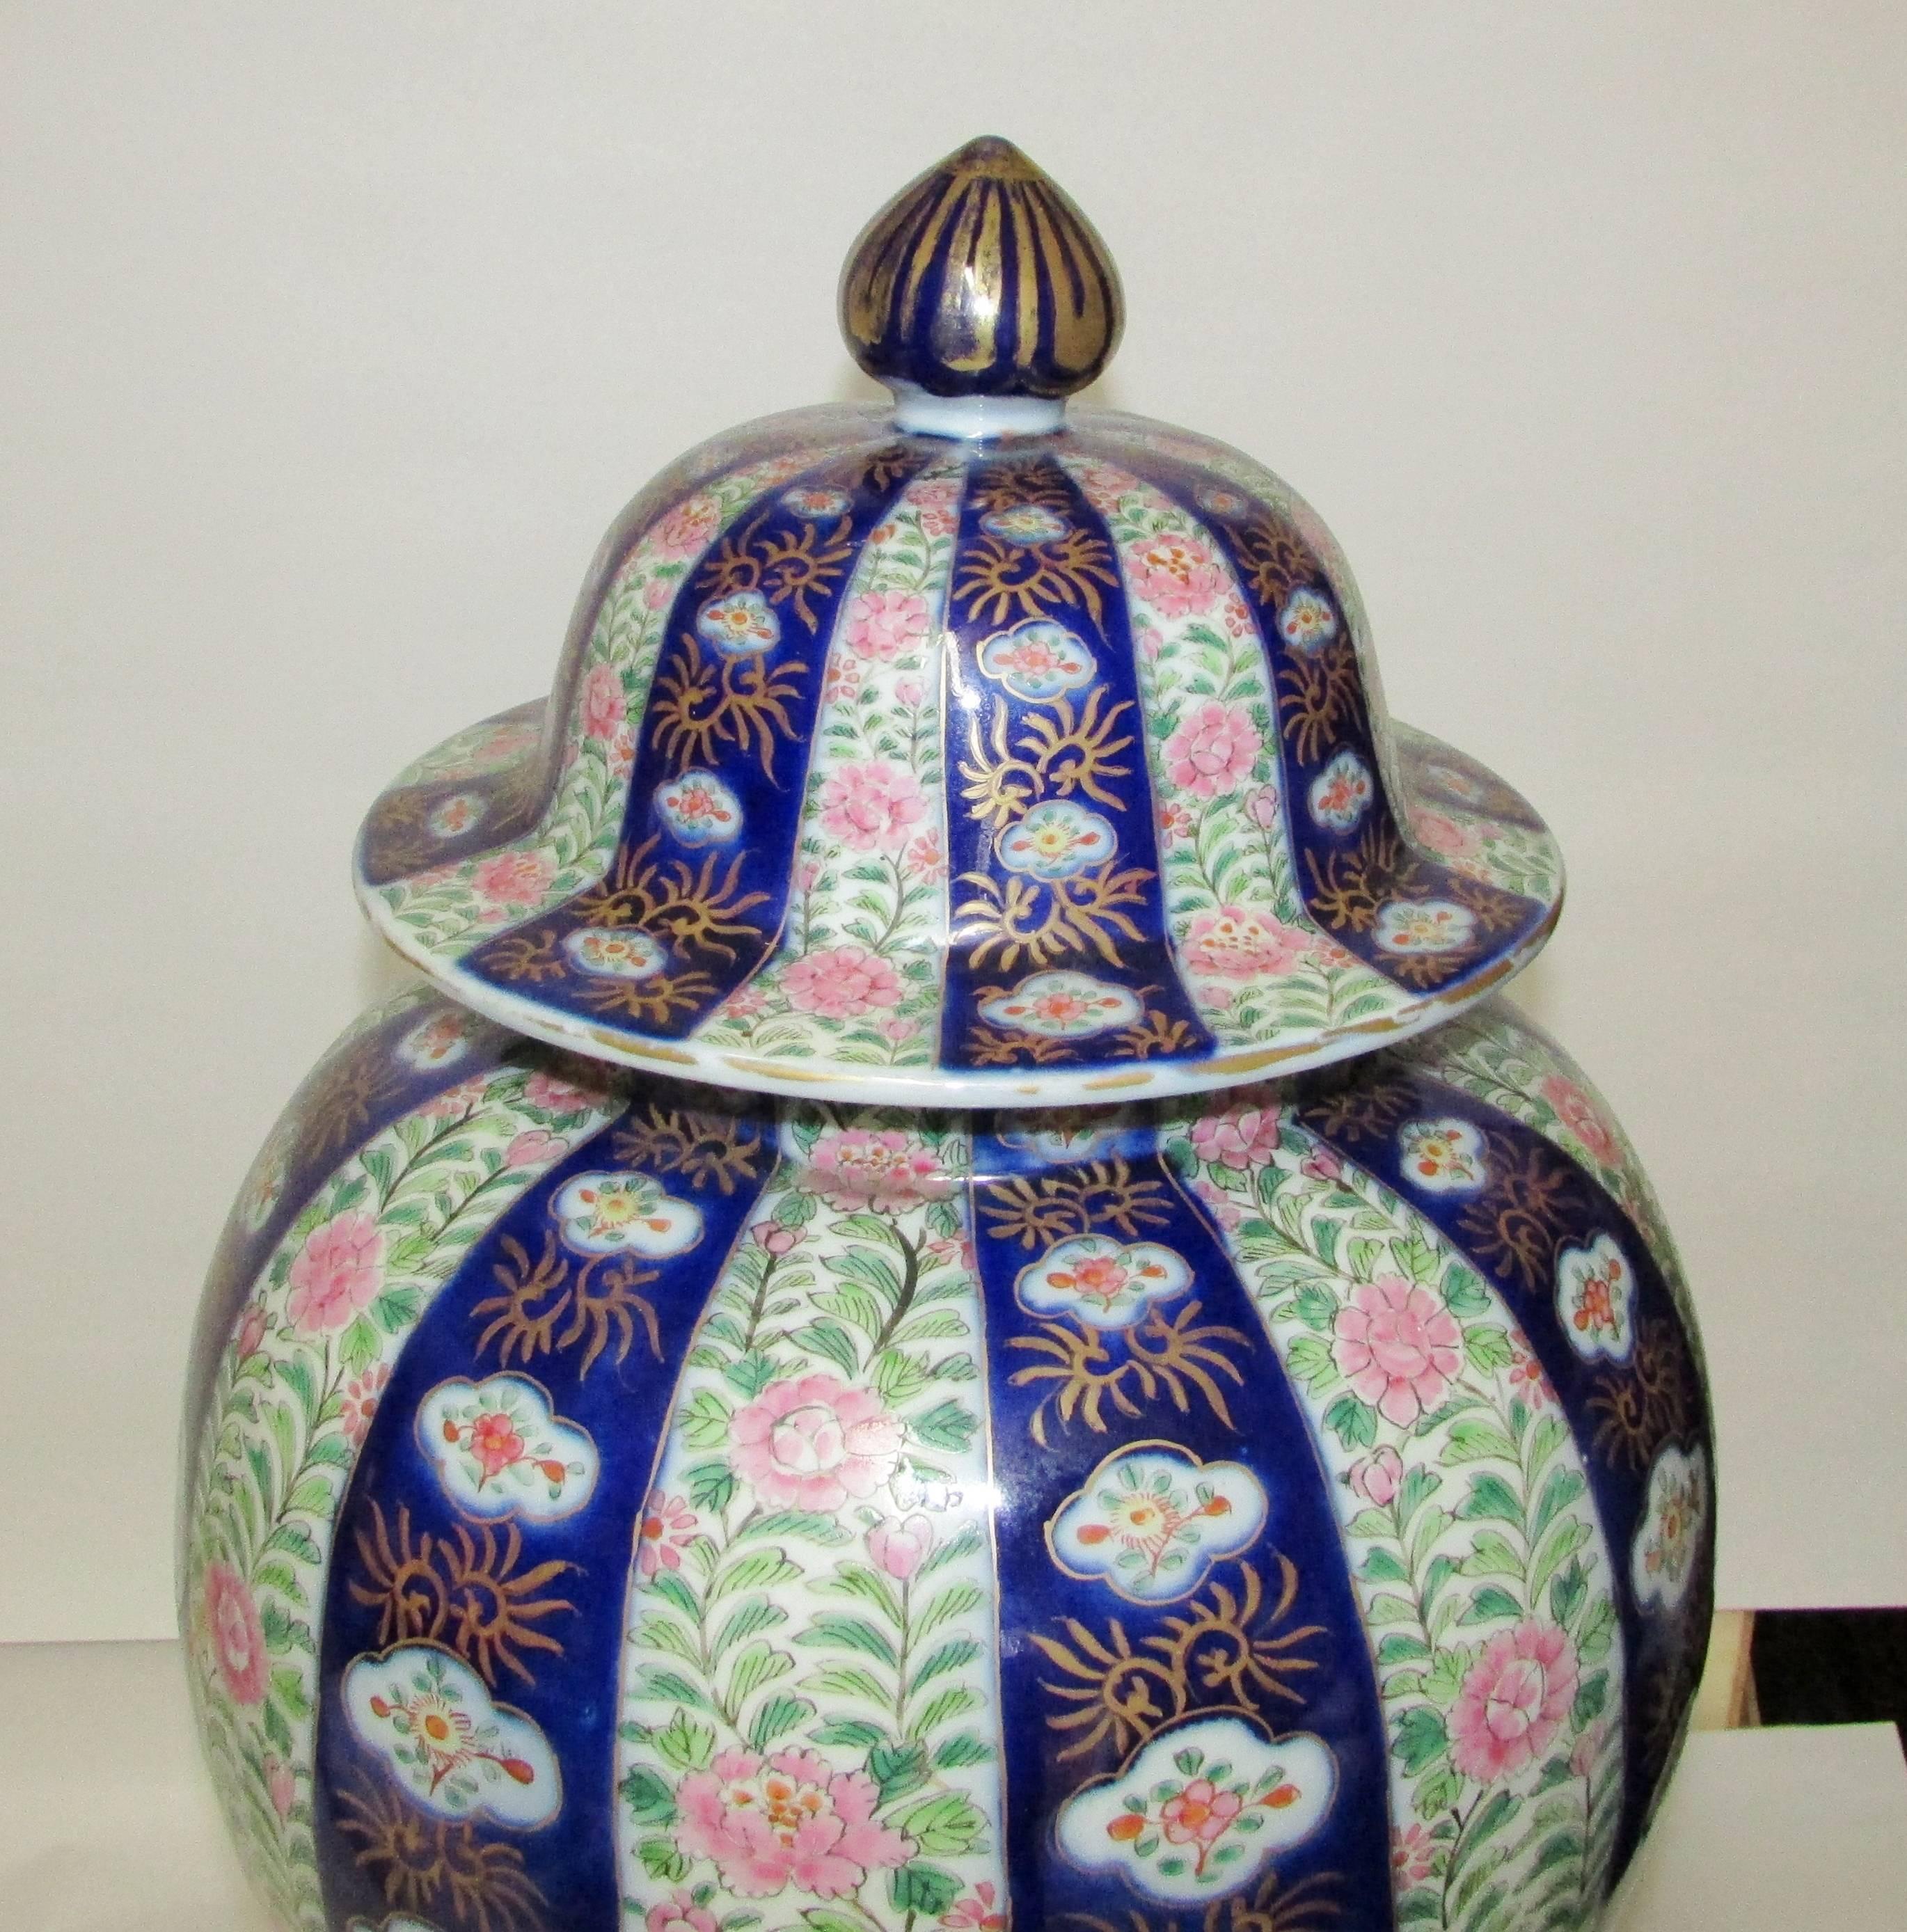 Excellent quality and skilfully painted Imari temple jar. The hand painted decoration is a rare pattern and the quality of Fukagawa. A large size of 24 inches tall.